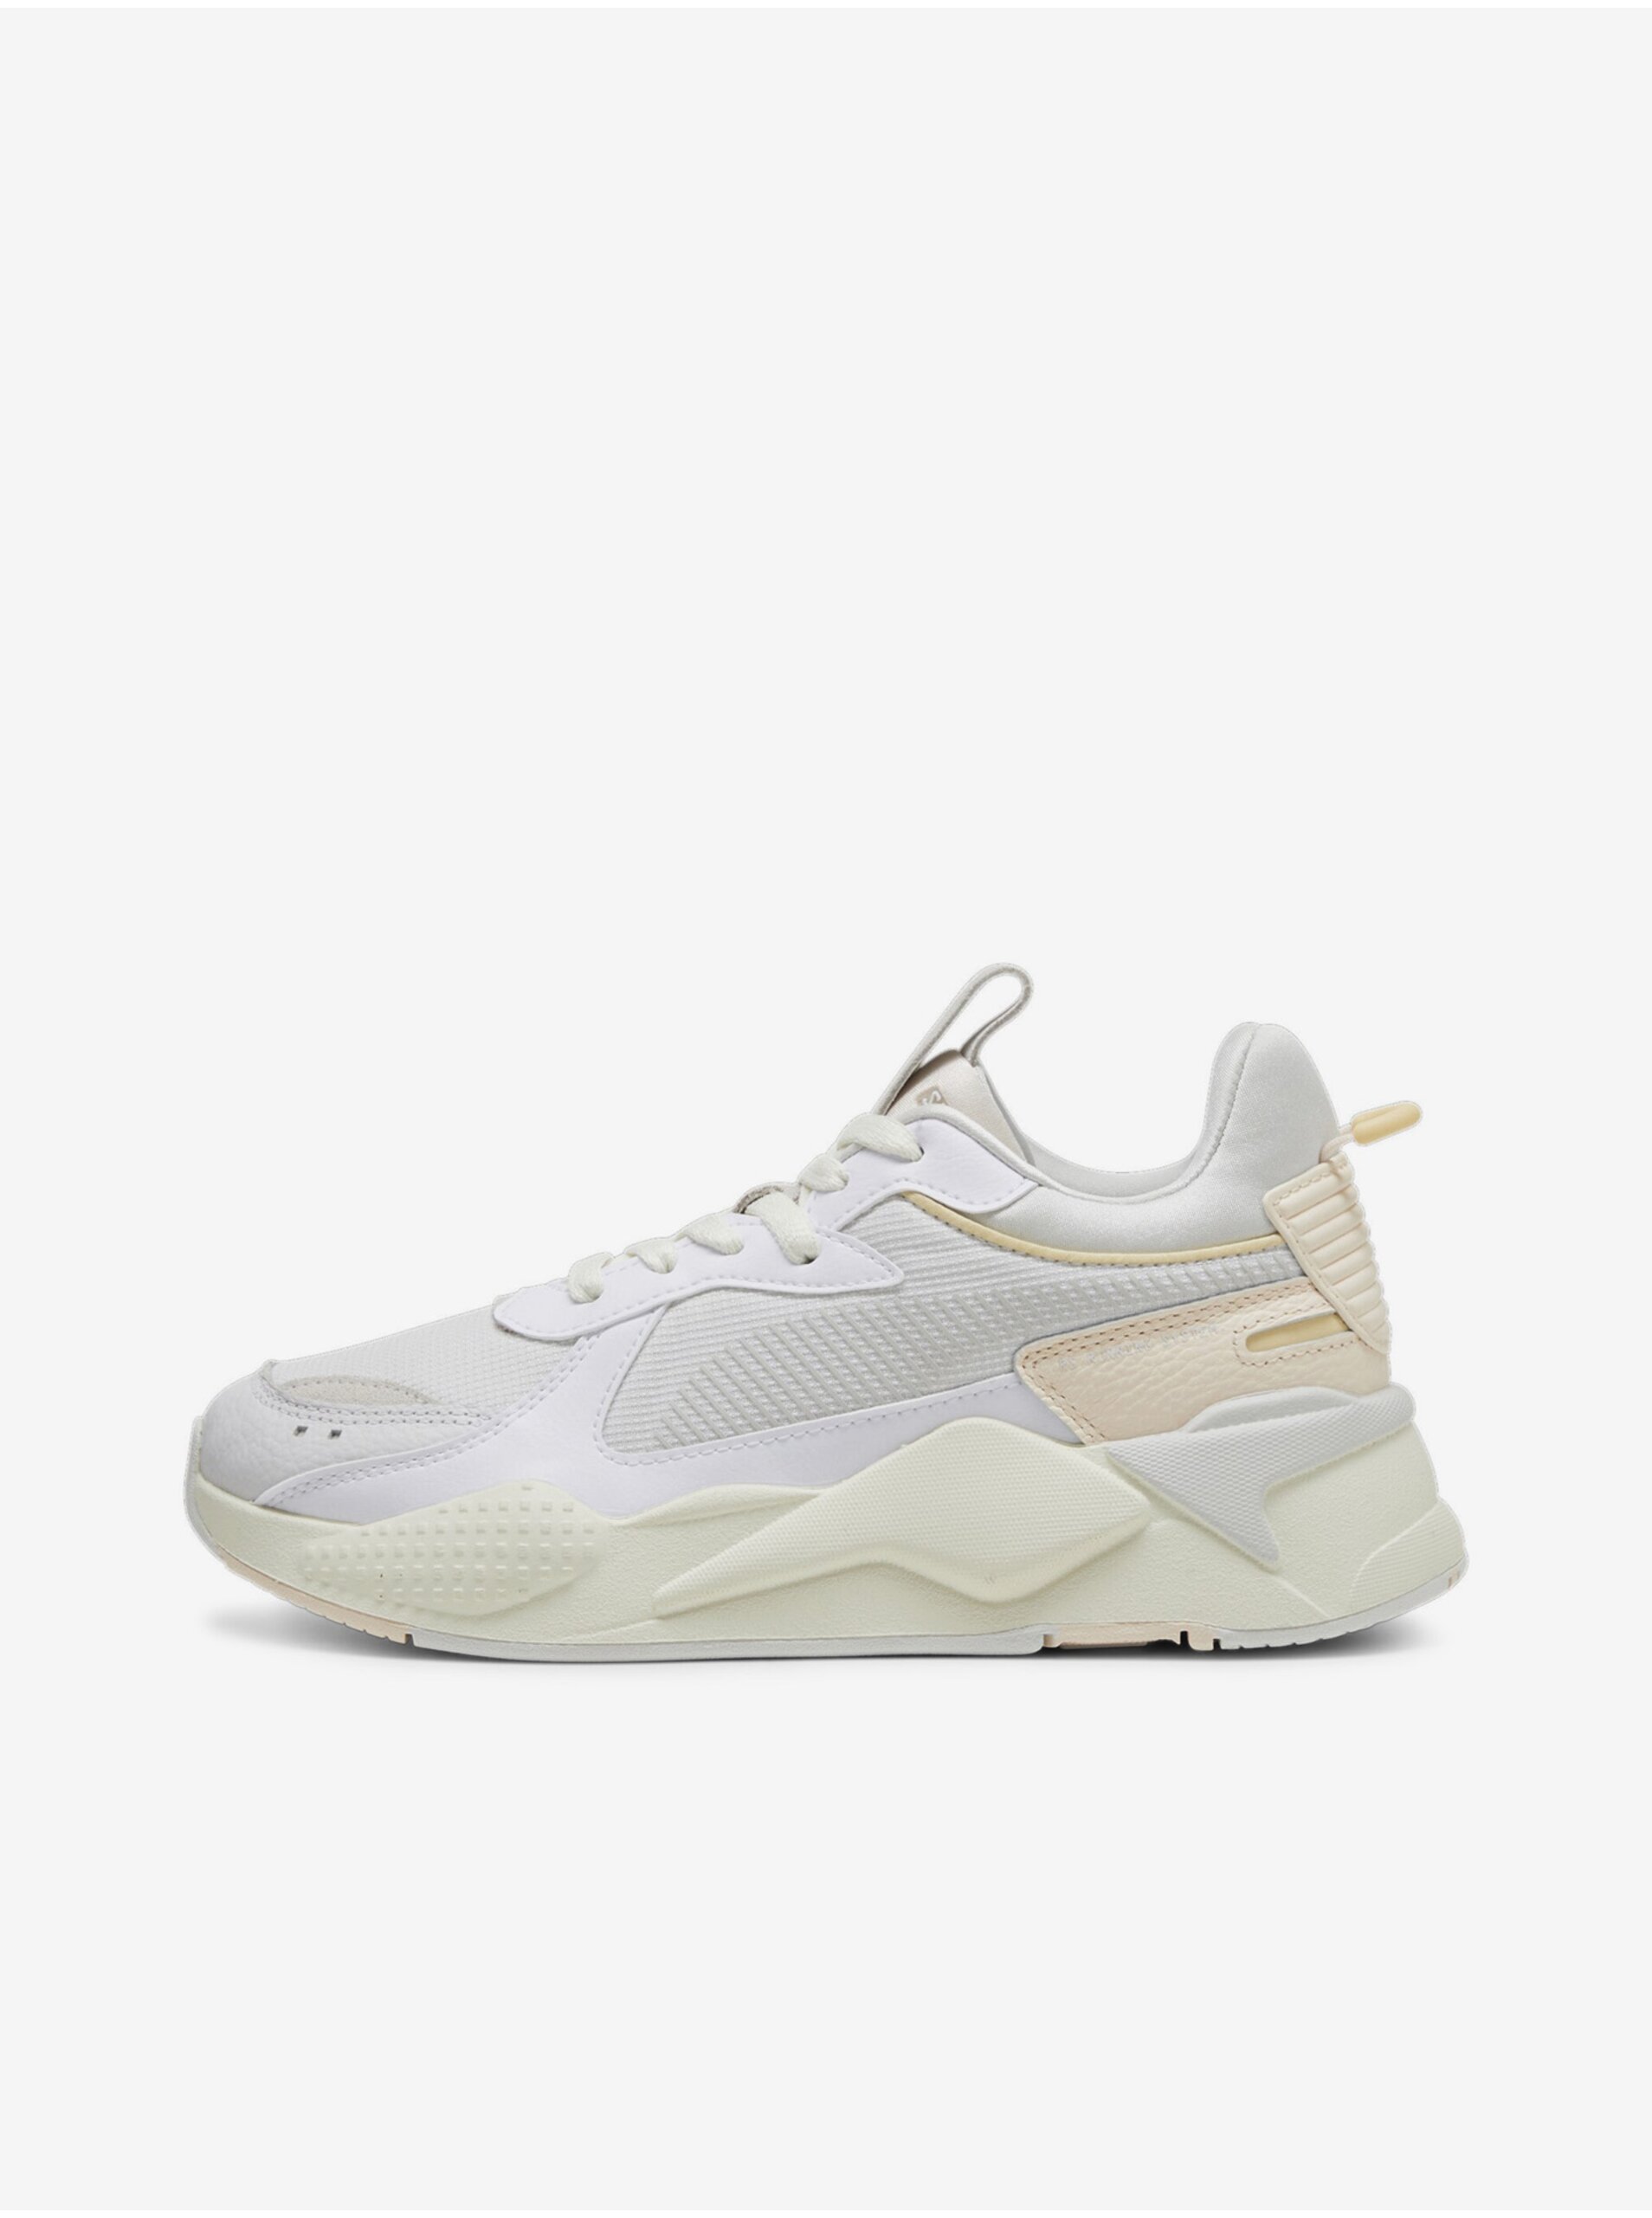 White women's sneakers with leather details Puma RS-X Soft Wns - Women